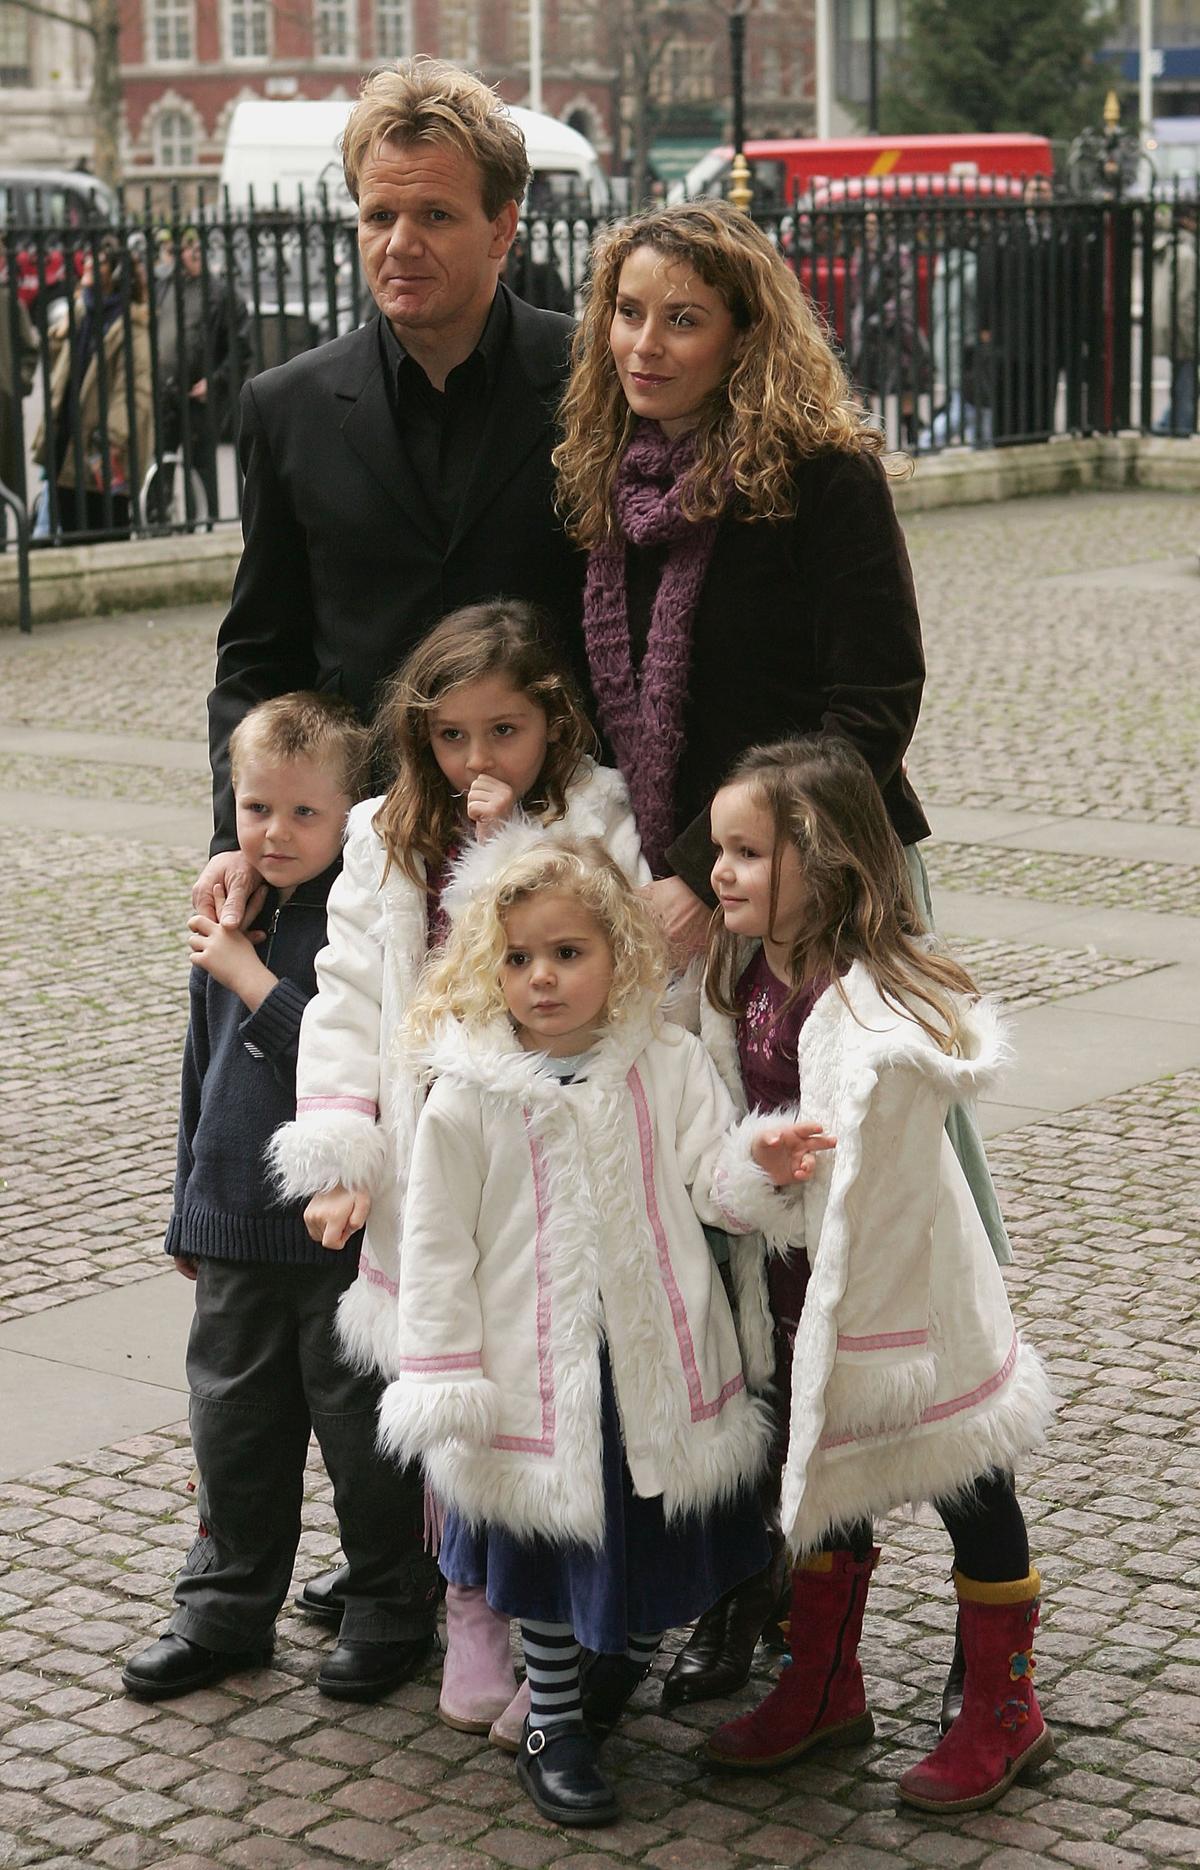 Chef Gordon Ramsay and family arrives at the Woman's Own Children Of Courage Award at Westminster Abbey on Dec. 15, 2004, in London. (©Getty Images | <a href="https://www.gettyimages.ca/detail/news-photo/chef-gordon-ramsay-and-family-arrives-at-the-womans-own-news-photo/51861955">MJ Kim</a>)